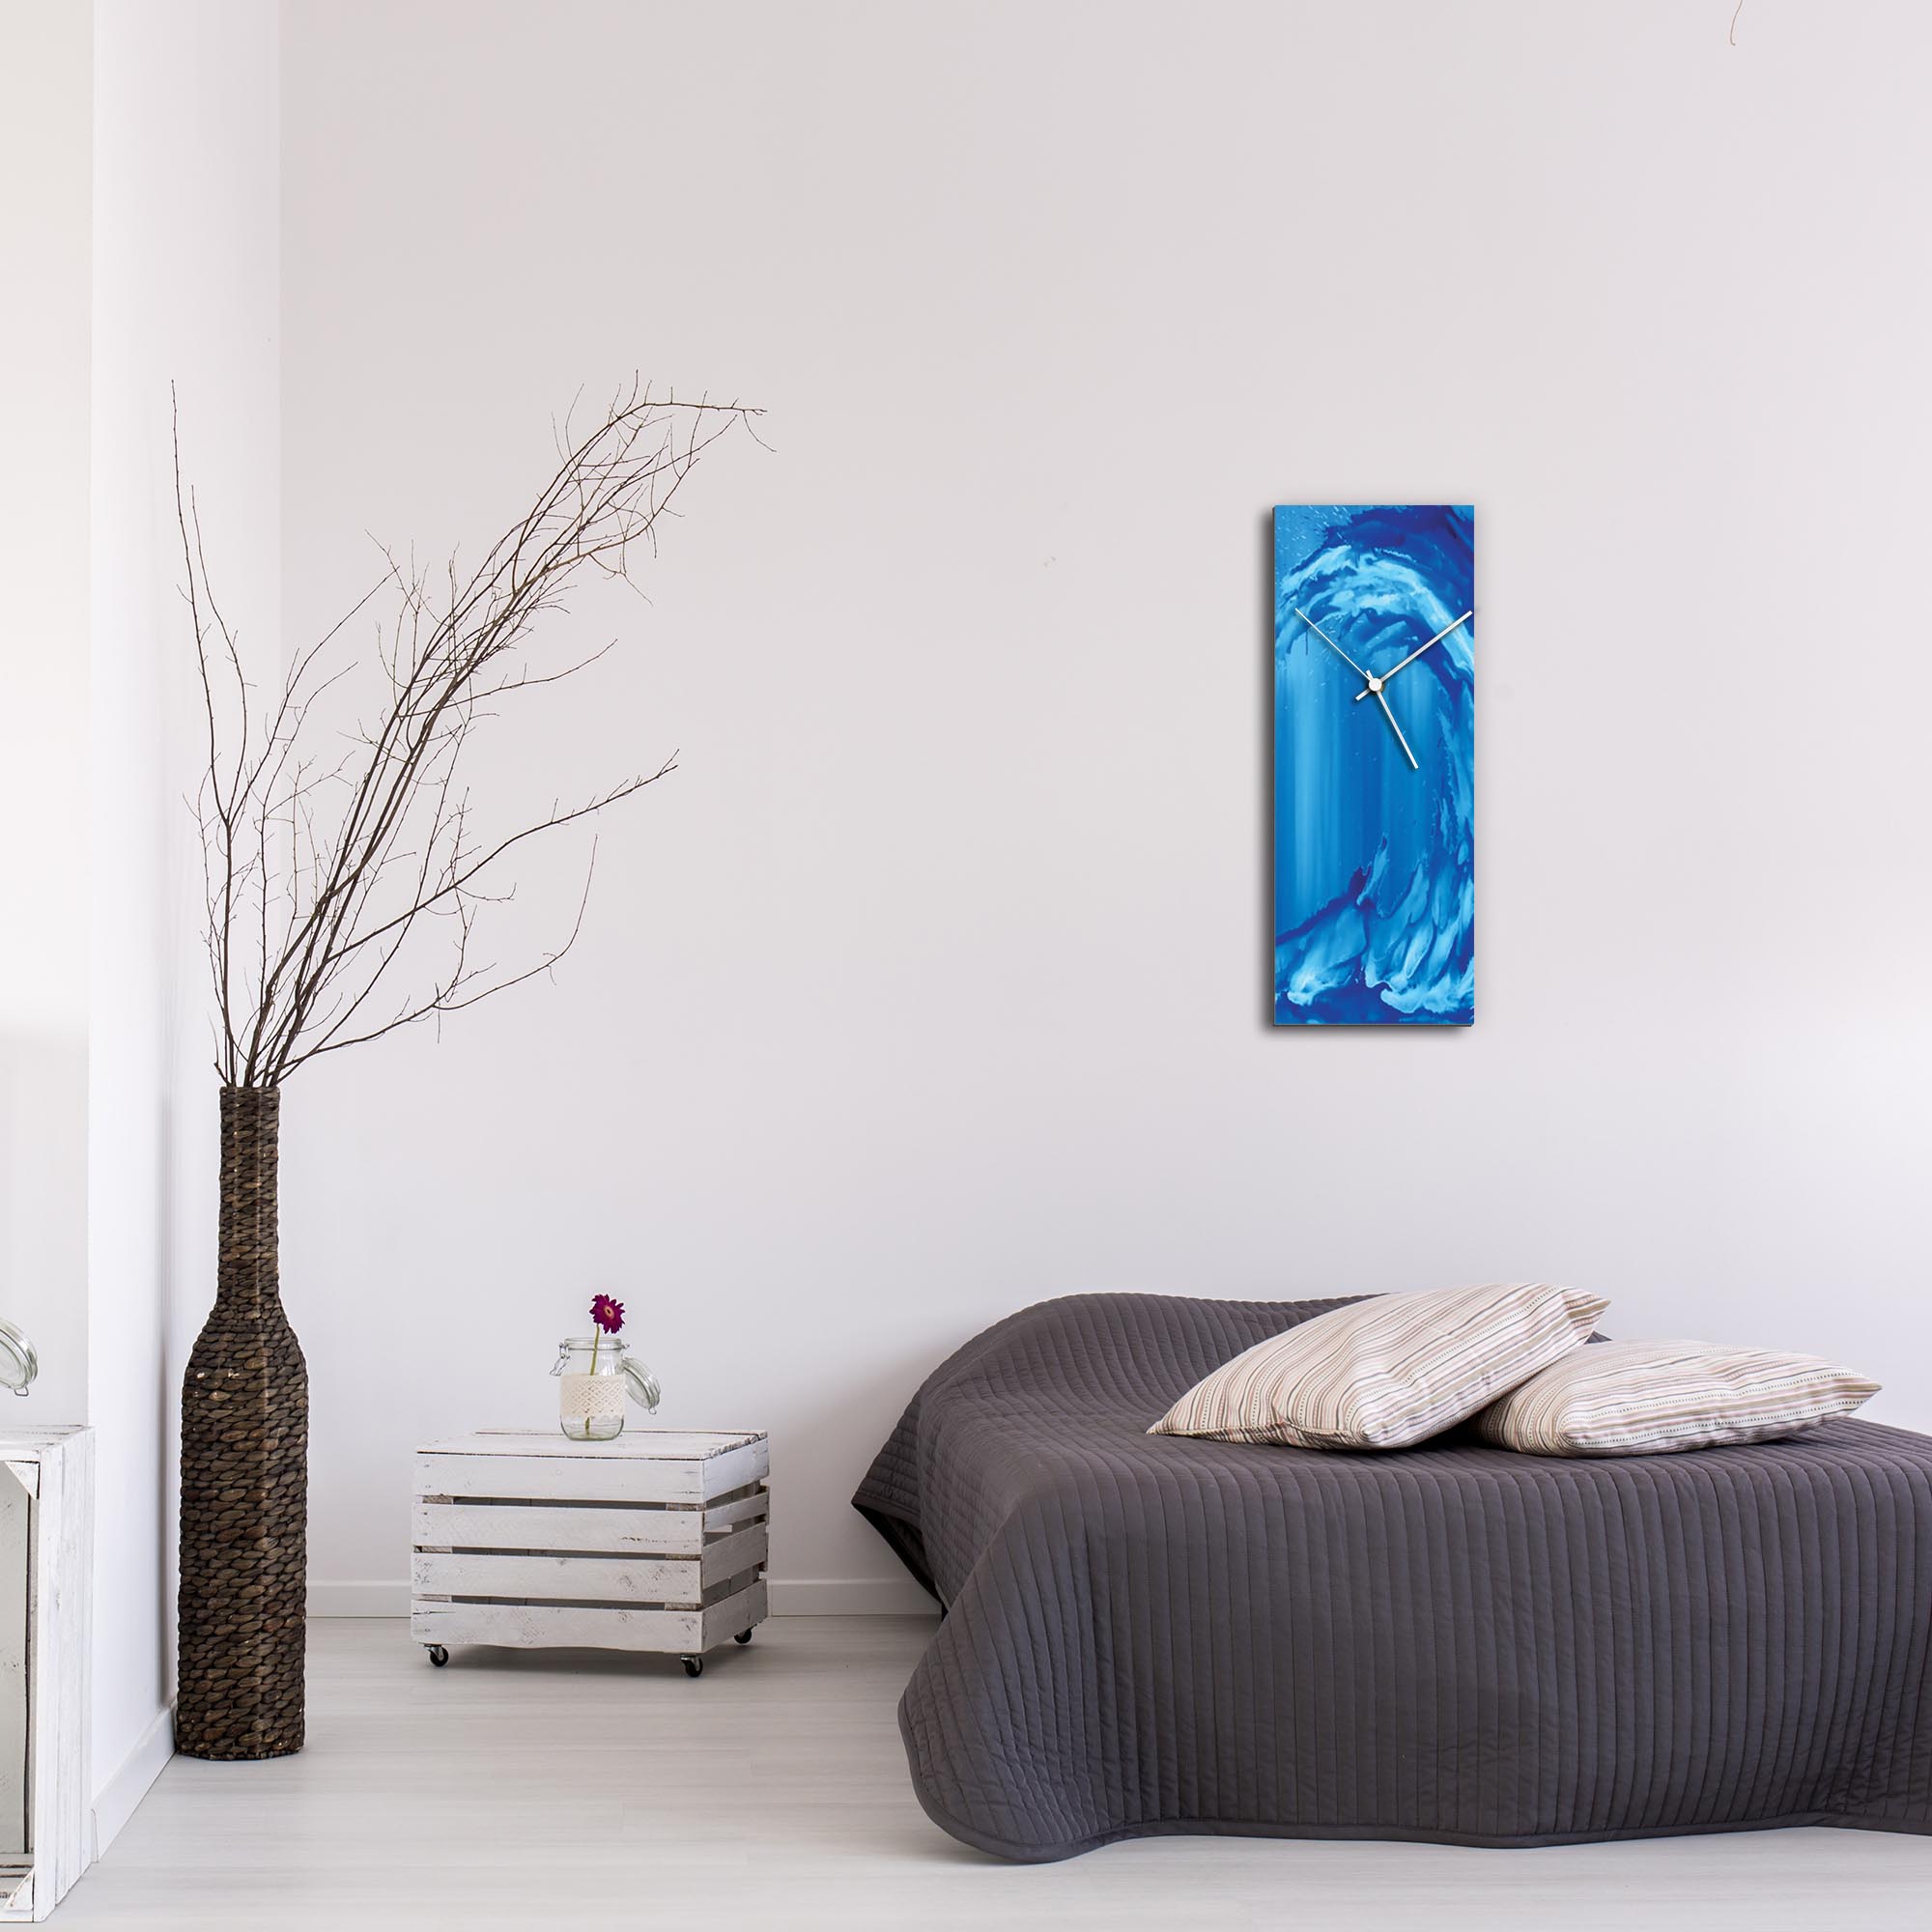 Blue Wave v2 Clock Large by Mendo Vasilevski - Urban Abstract Home Decor - Lifestyle View